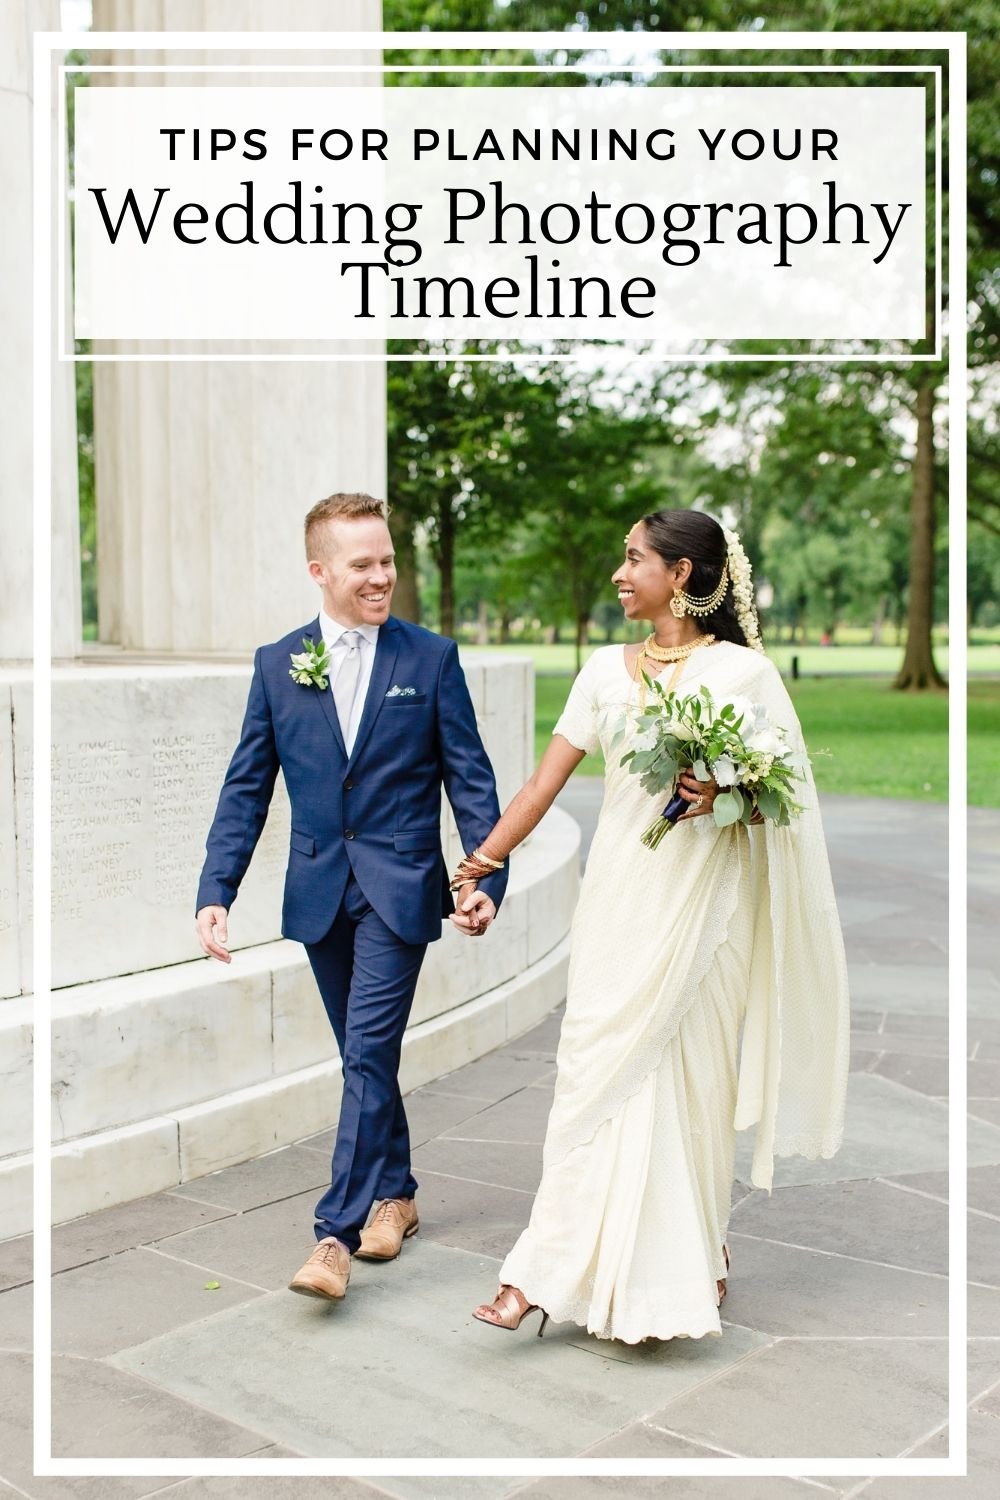 Planning your wedding photography timeline